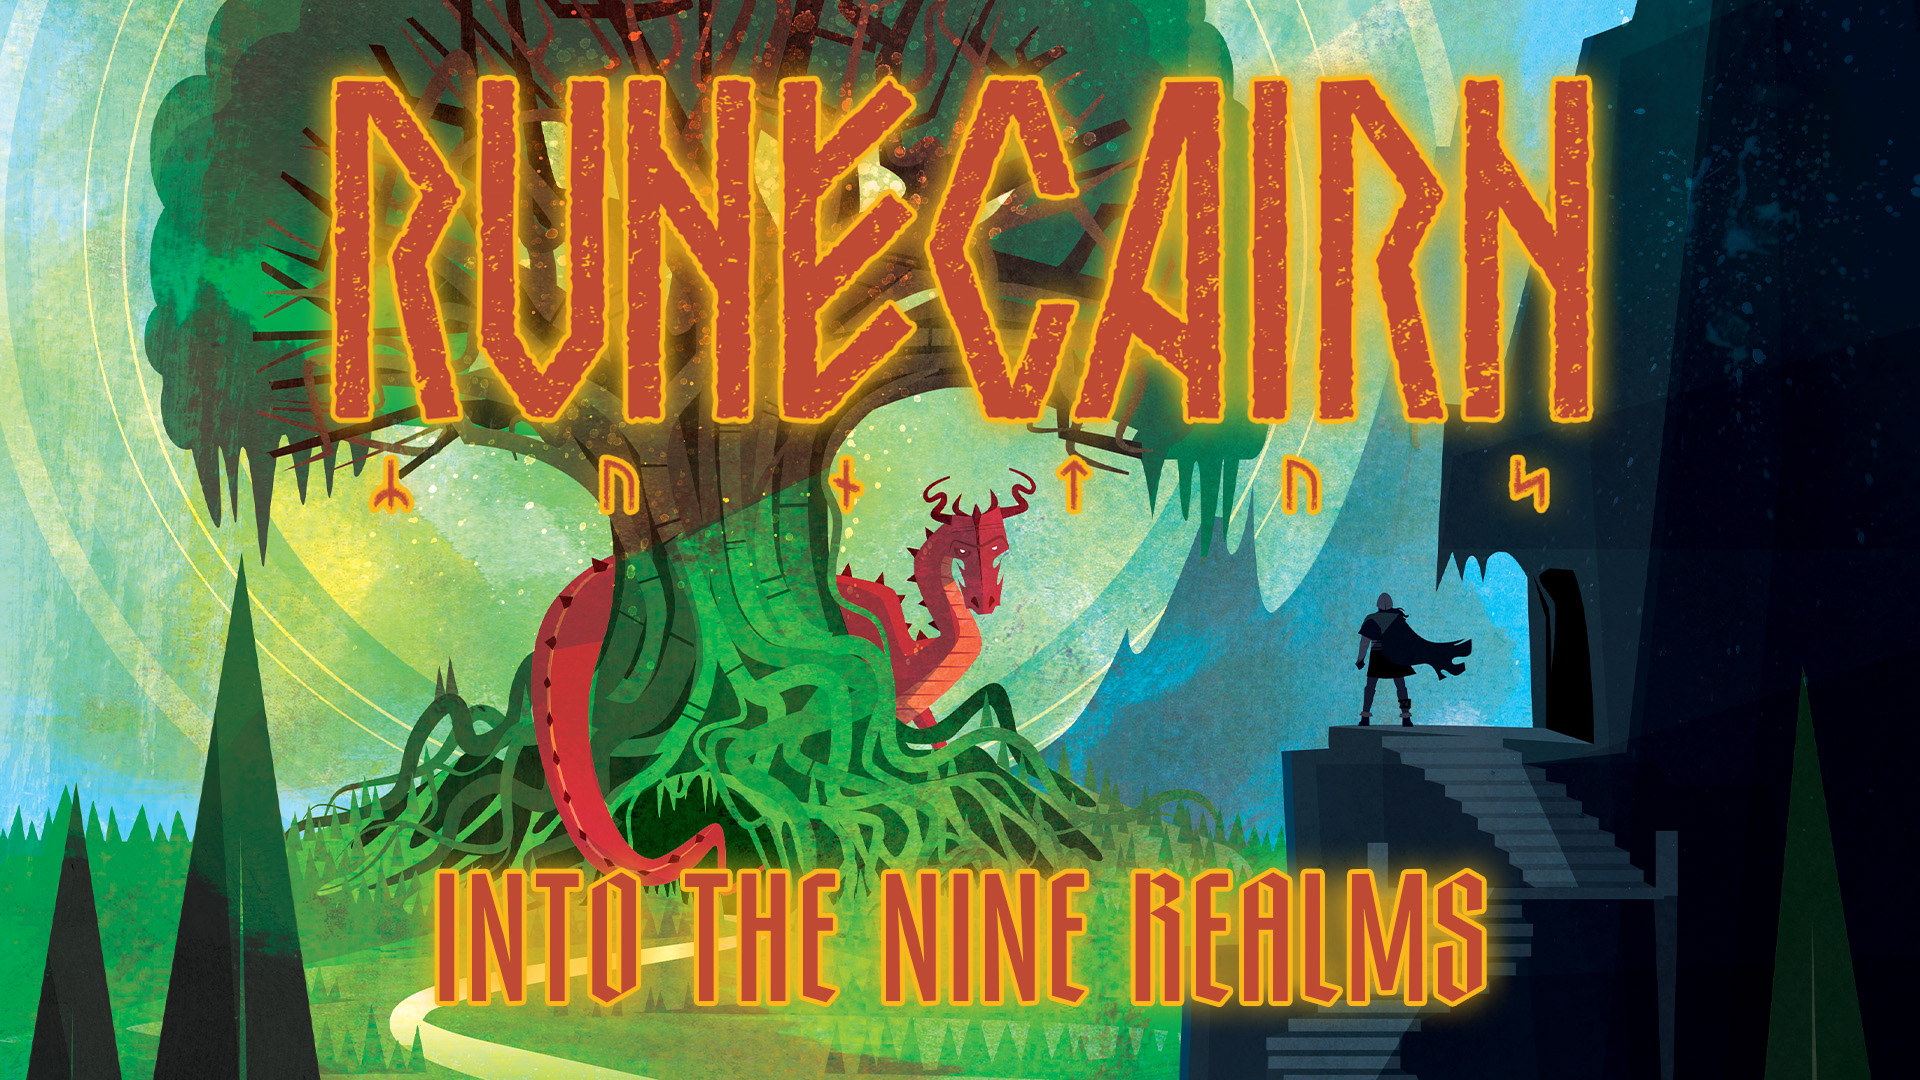 Runecairn: Into the Nine Realms. Colourful and stylised cover depicting an enormous green tree with a red serpent wrapped around it. A lone adventurer watches the dragon, stood outside a cave and near stone steps leading to adventure.